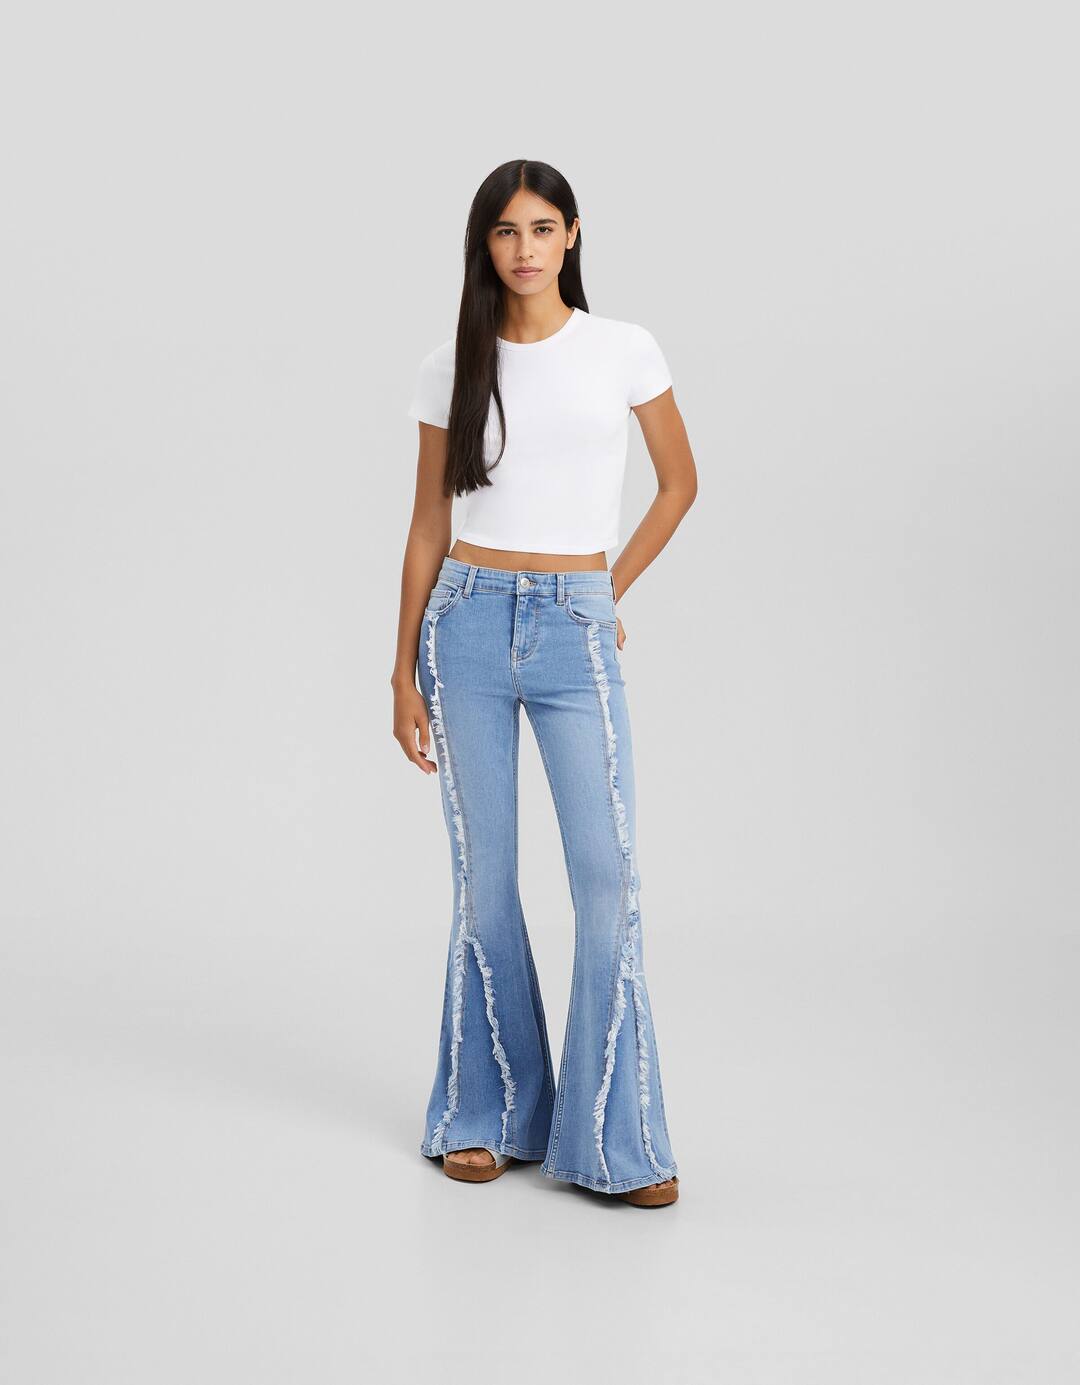 ’70s flare jeans